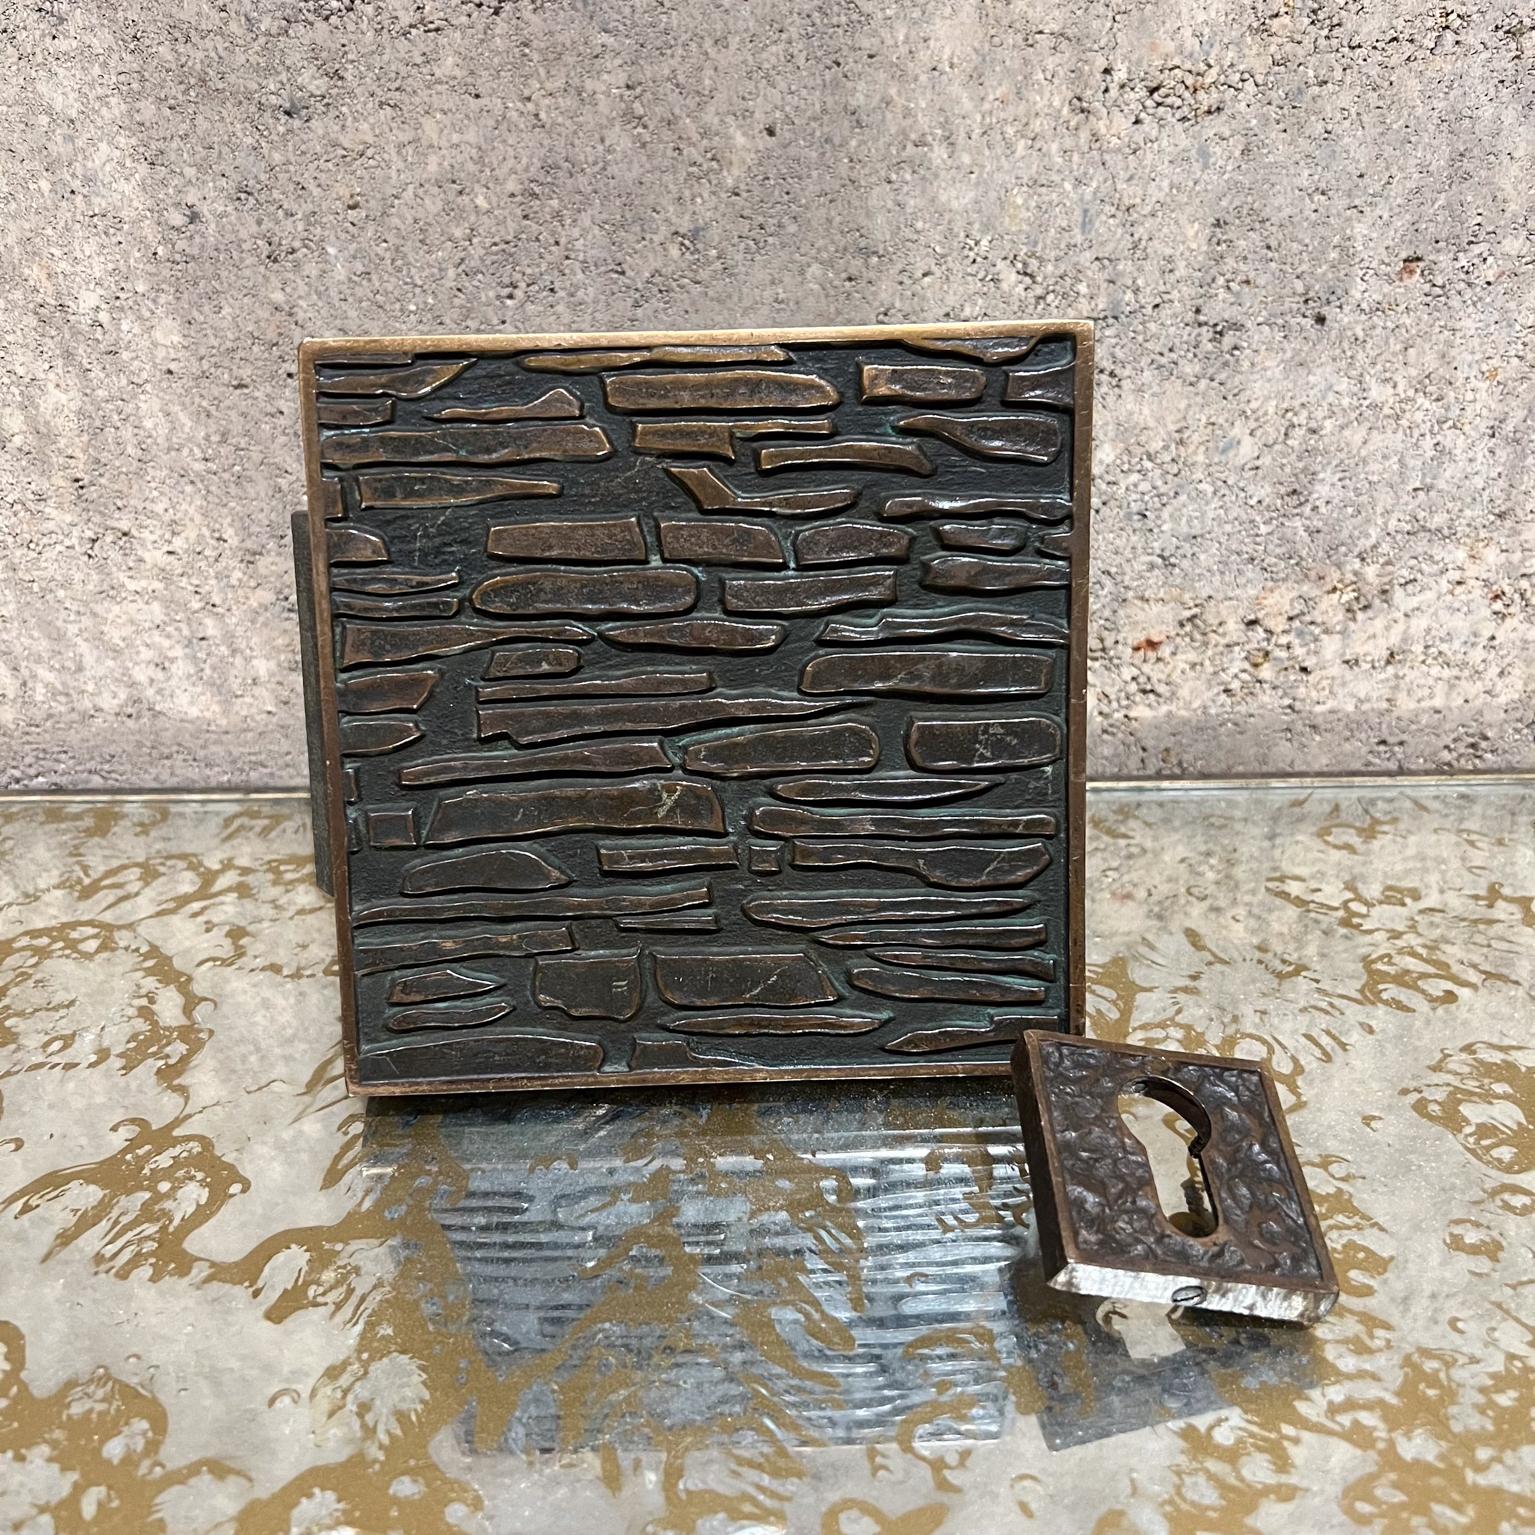 AMBIANIC presents
Bronze Abstract Door Handle and Keyhole Plate Germany
Bronze door handle 5.75 tall x 6.75 w x 2.5
stamped by maker
Keyhole 1.88 x 1.88 x .25
Original preowned vintage condition
Refer to images shown.